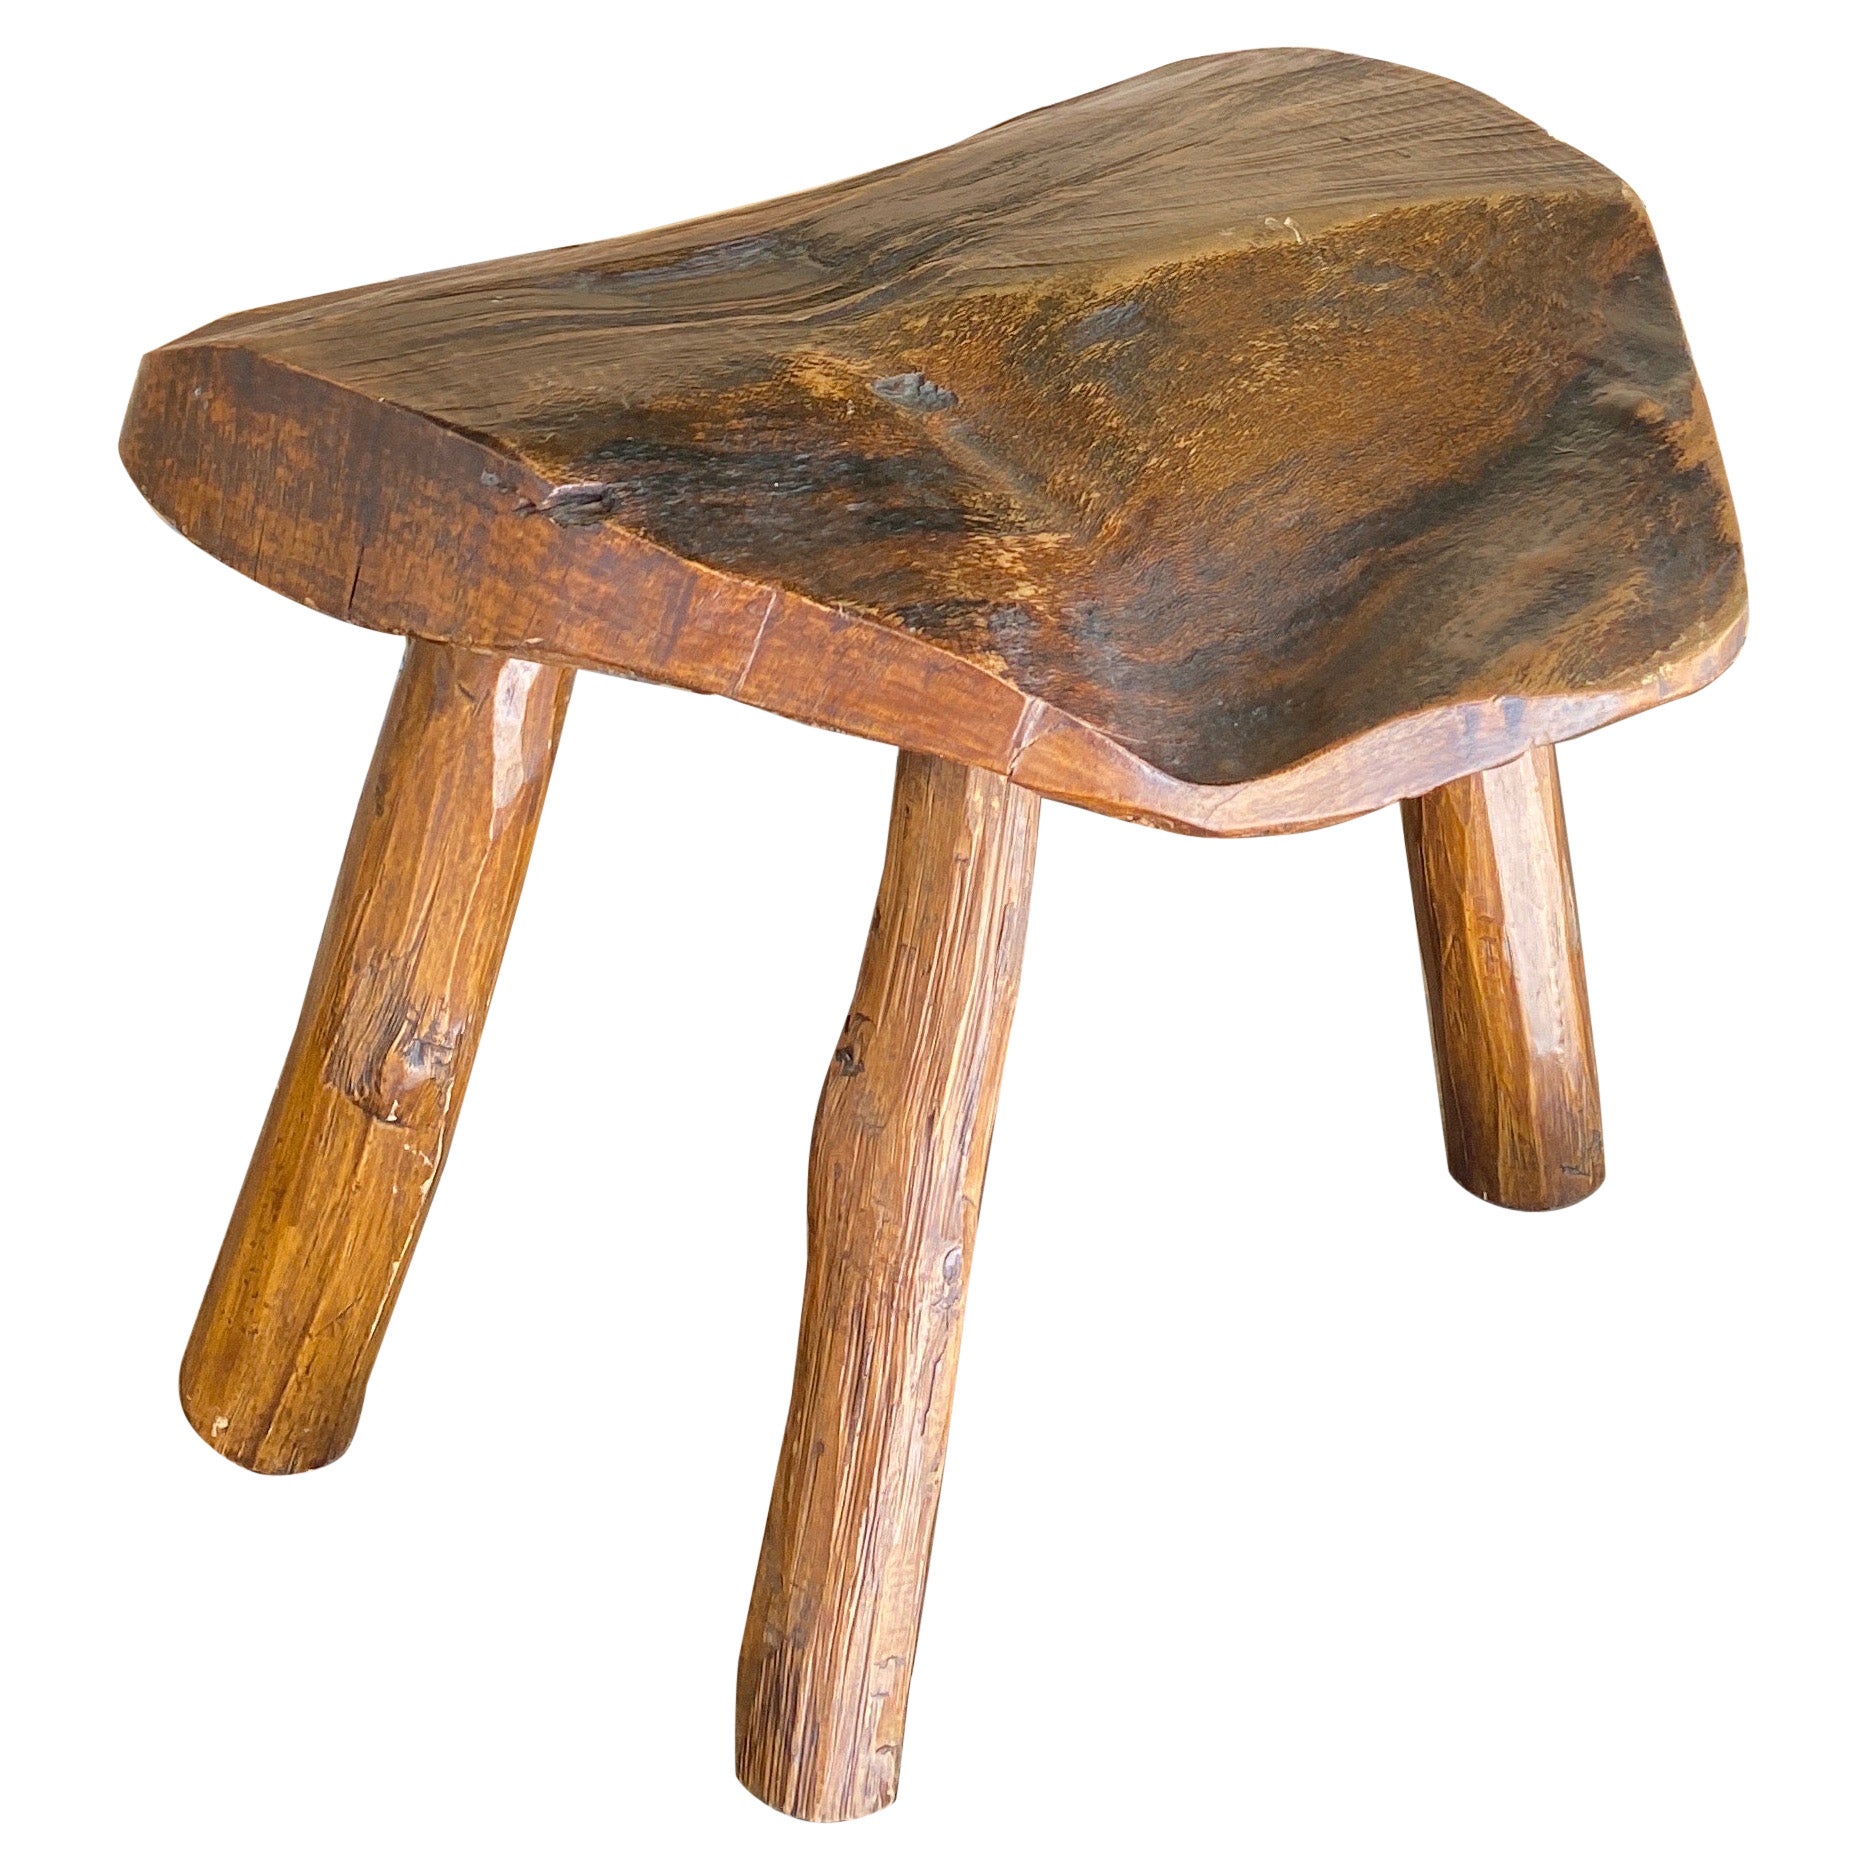 Brutalist Footstool in Wood, Free Shape, Brown Color, Low Size, France, 1950 For Sale